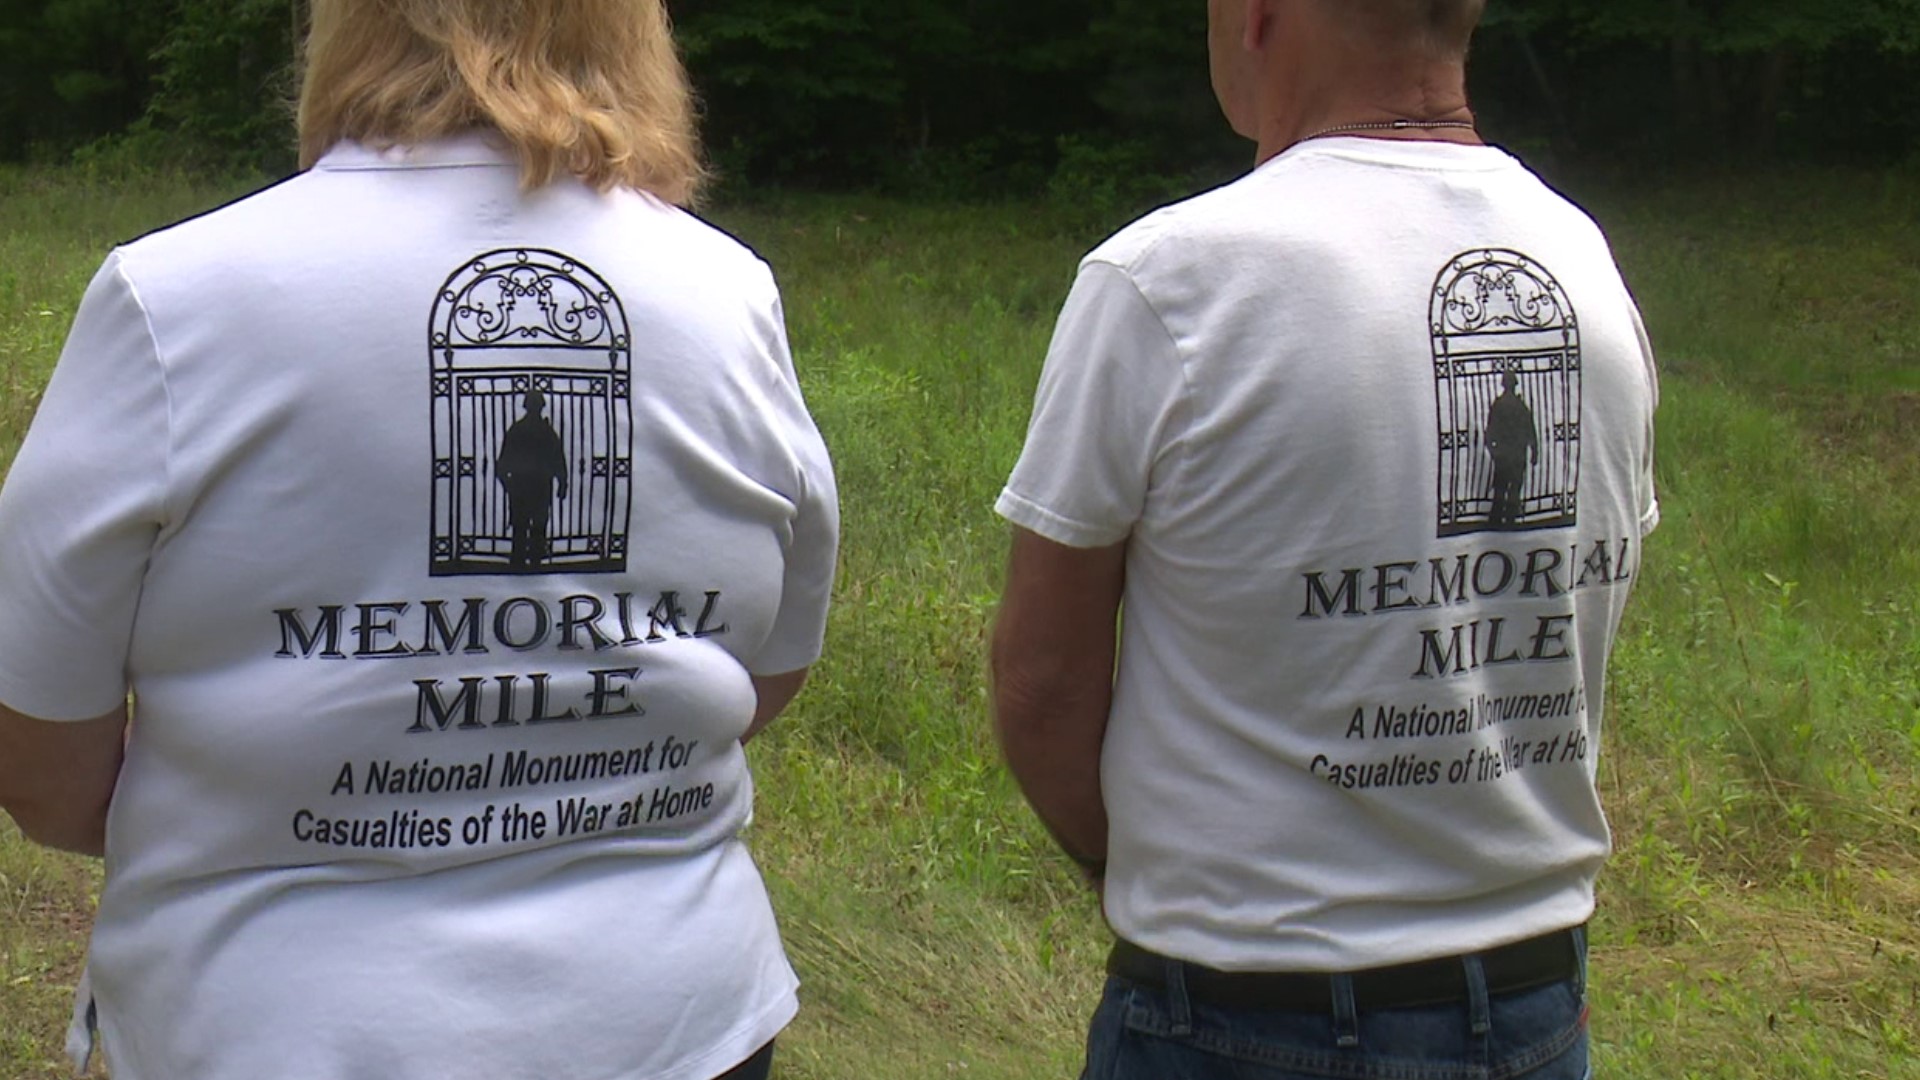 The parents of a veteran who died by suicide want to build a national memorial - not just in his honor, but in honor of all vets who have taken their own lives.